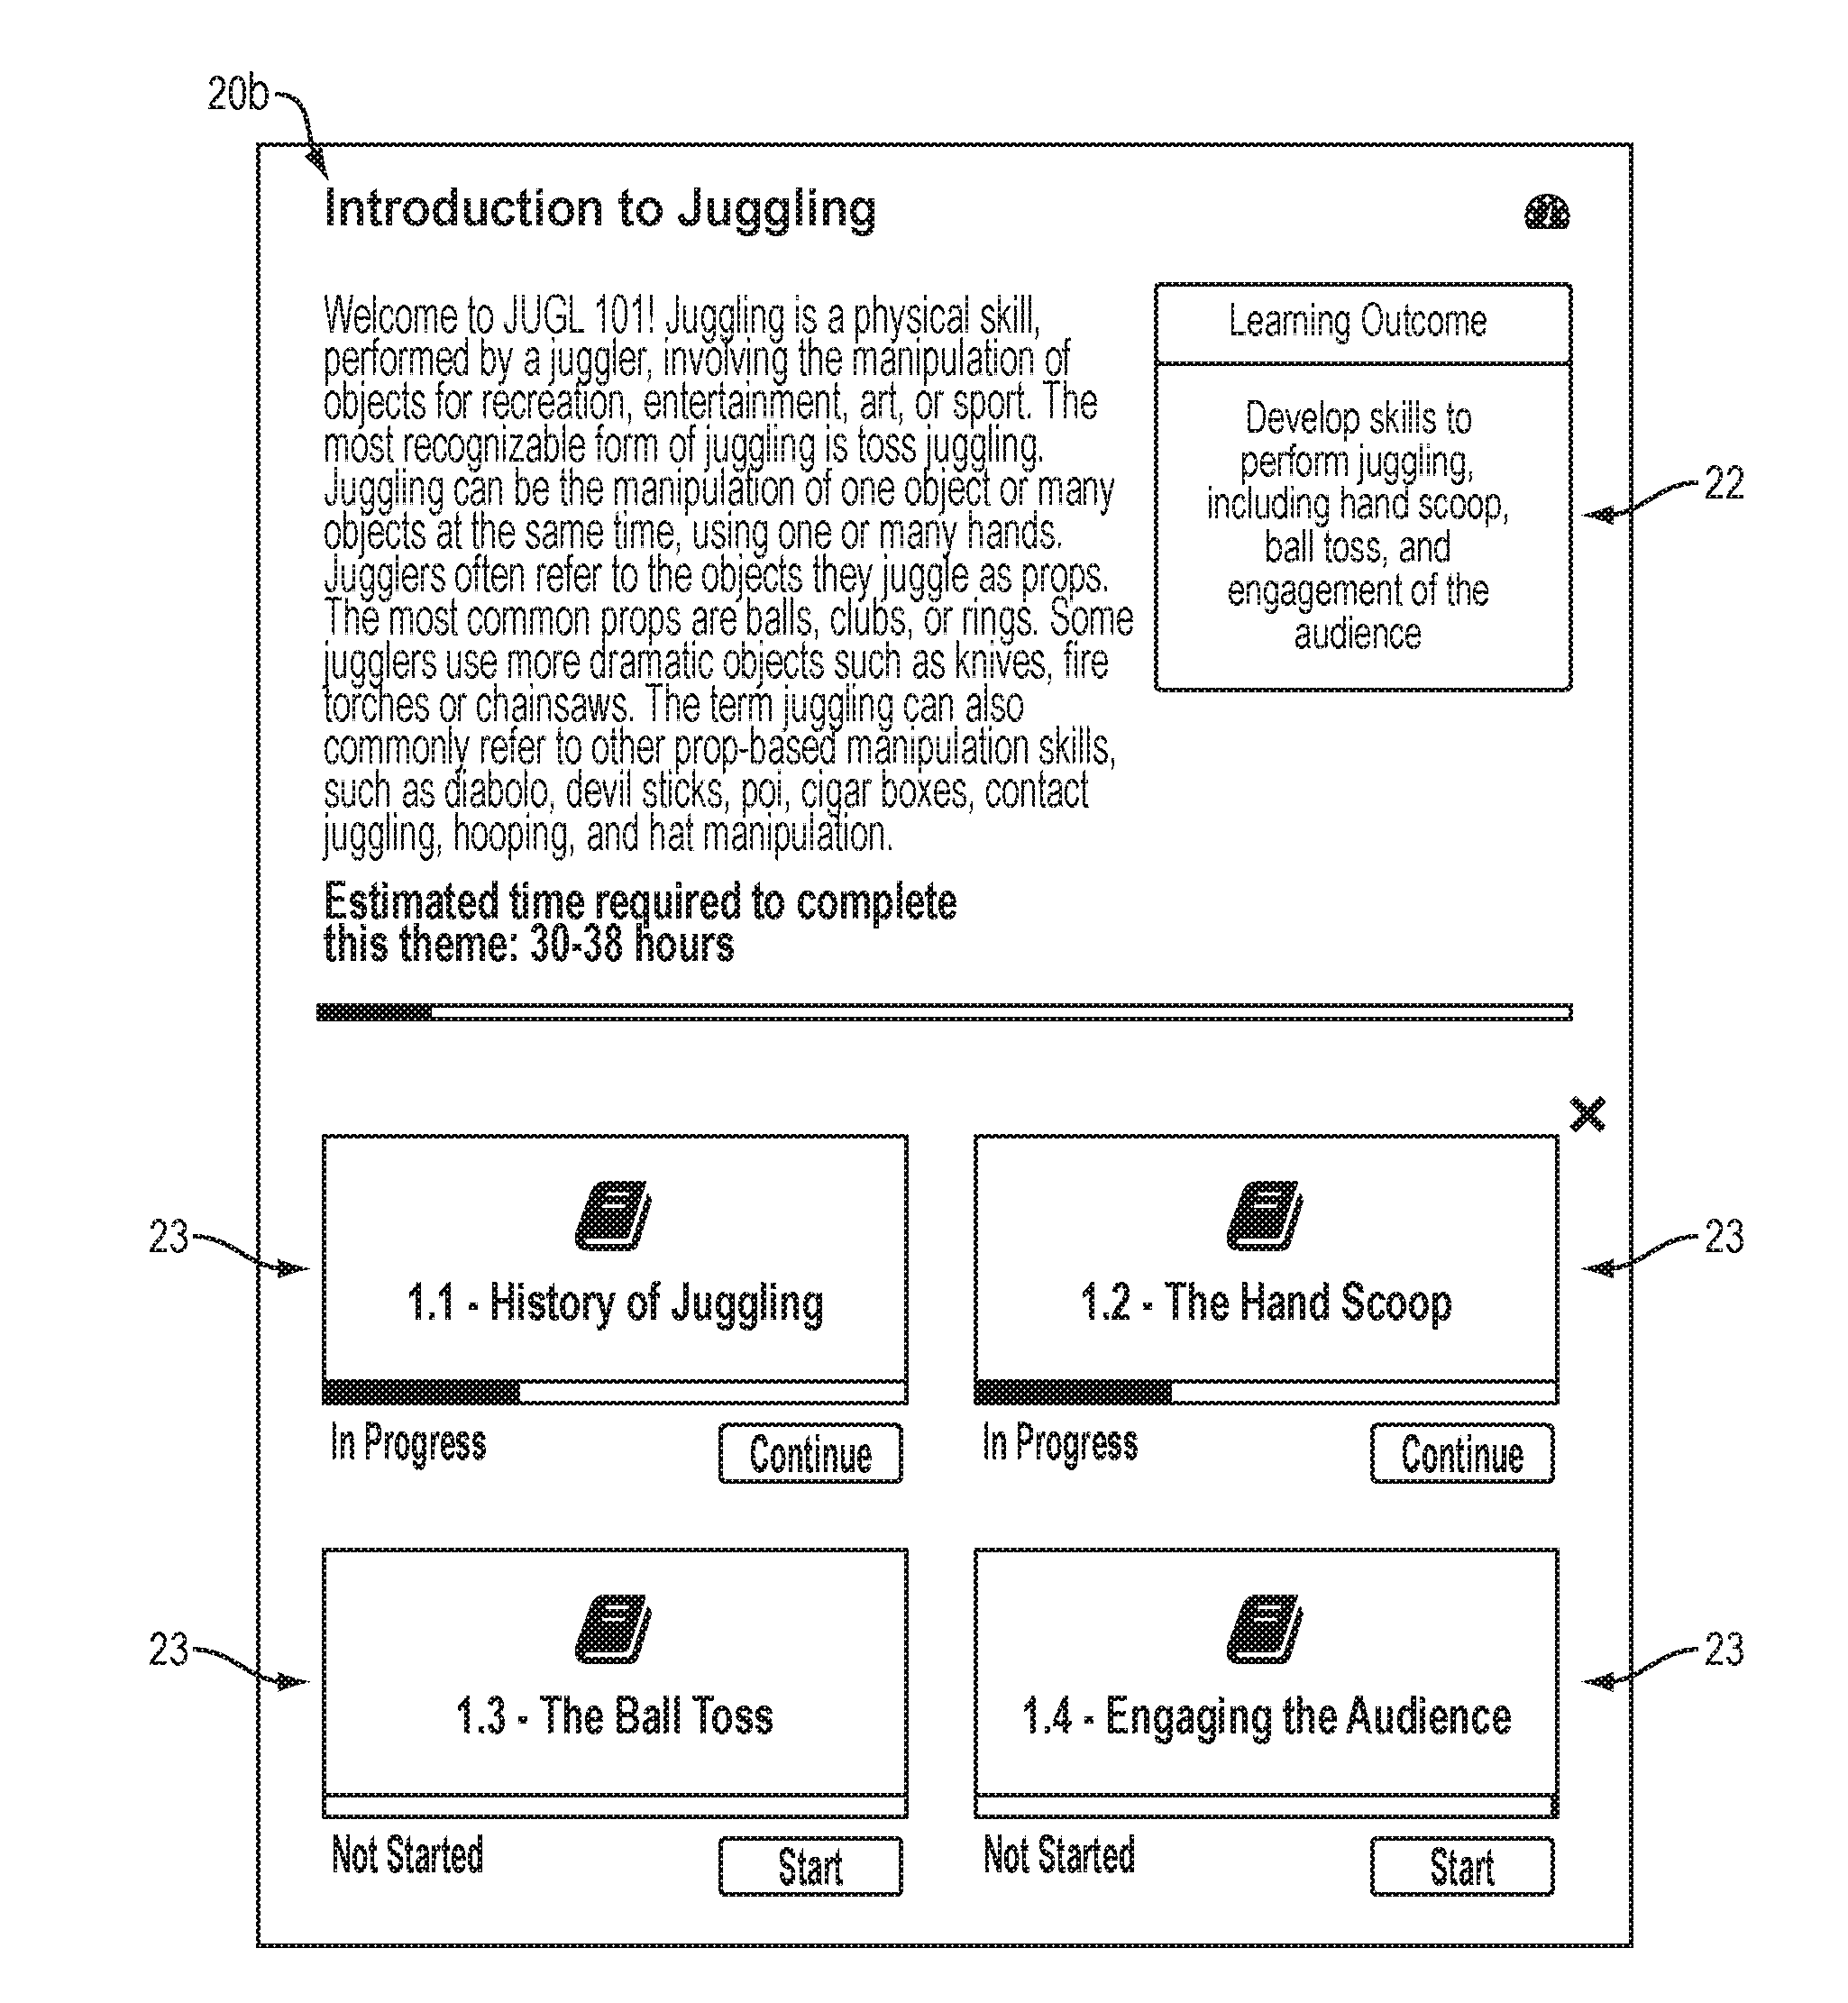 Computerized system and method for providing competency based learning